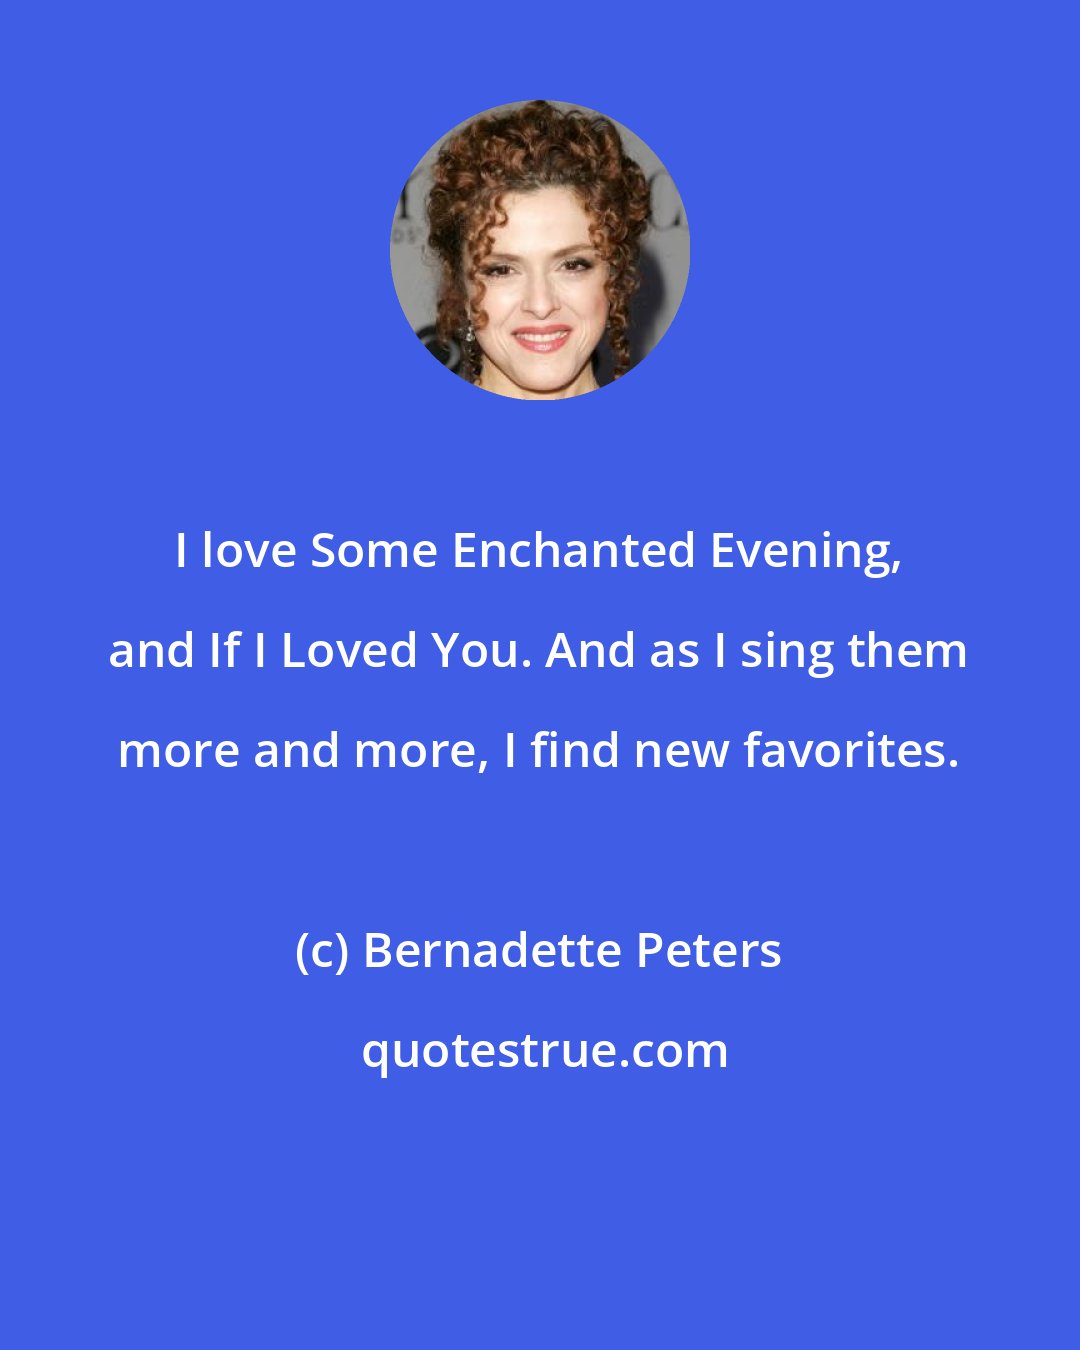 Bernadette Peters: I love Some Enchanted Evening, and If I Loved You. And as I sing them more and more, I find new favorites.